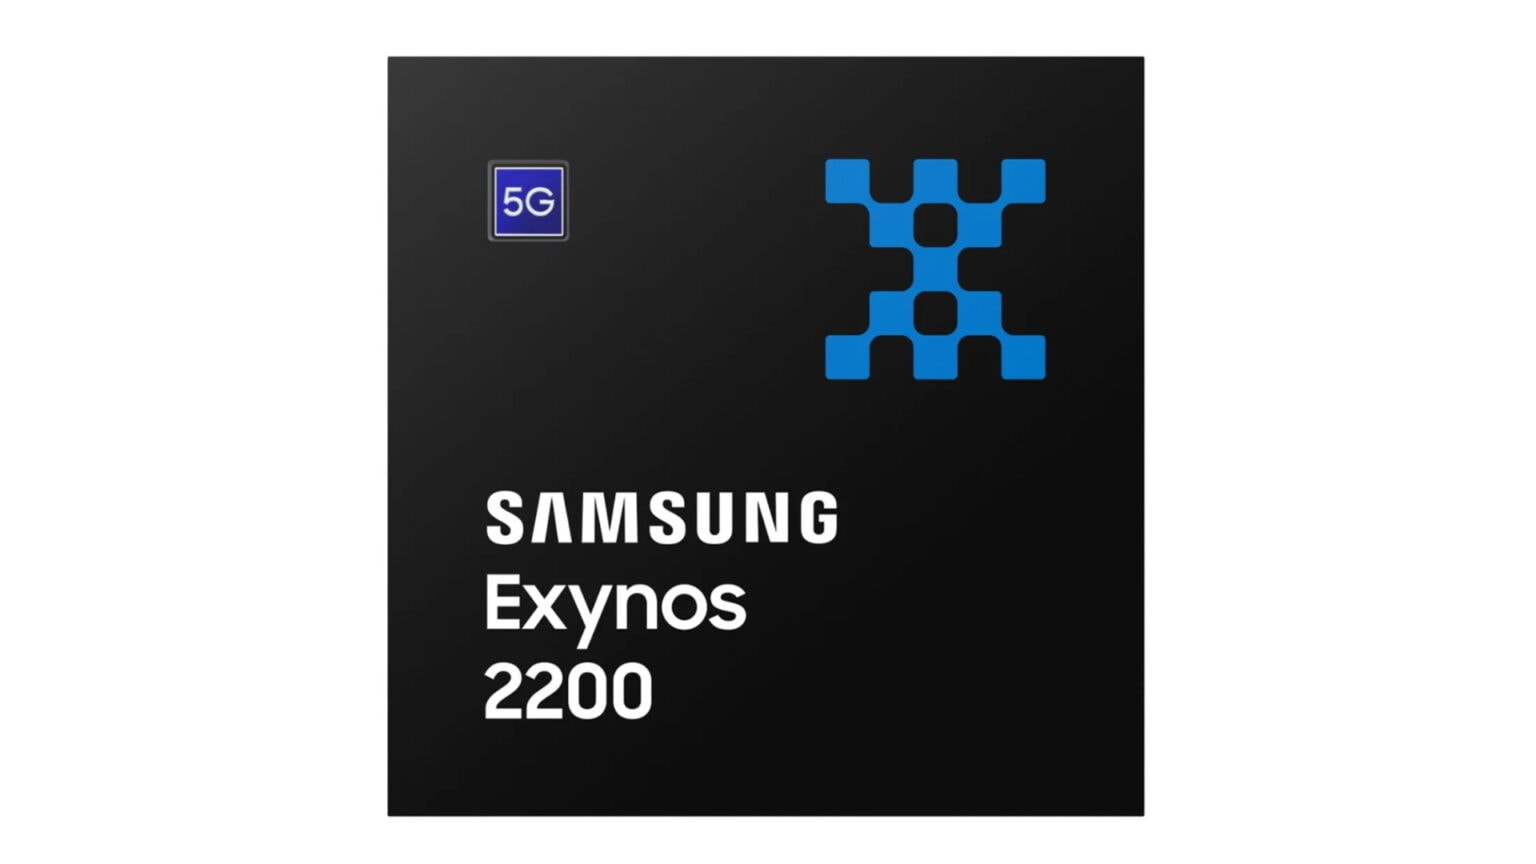 Samsung Exynos 2200 with ray tracing